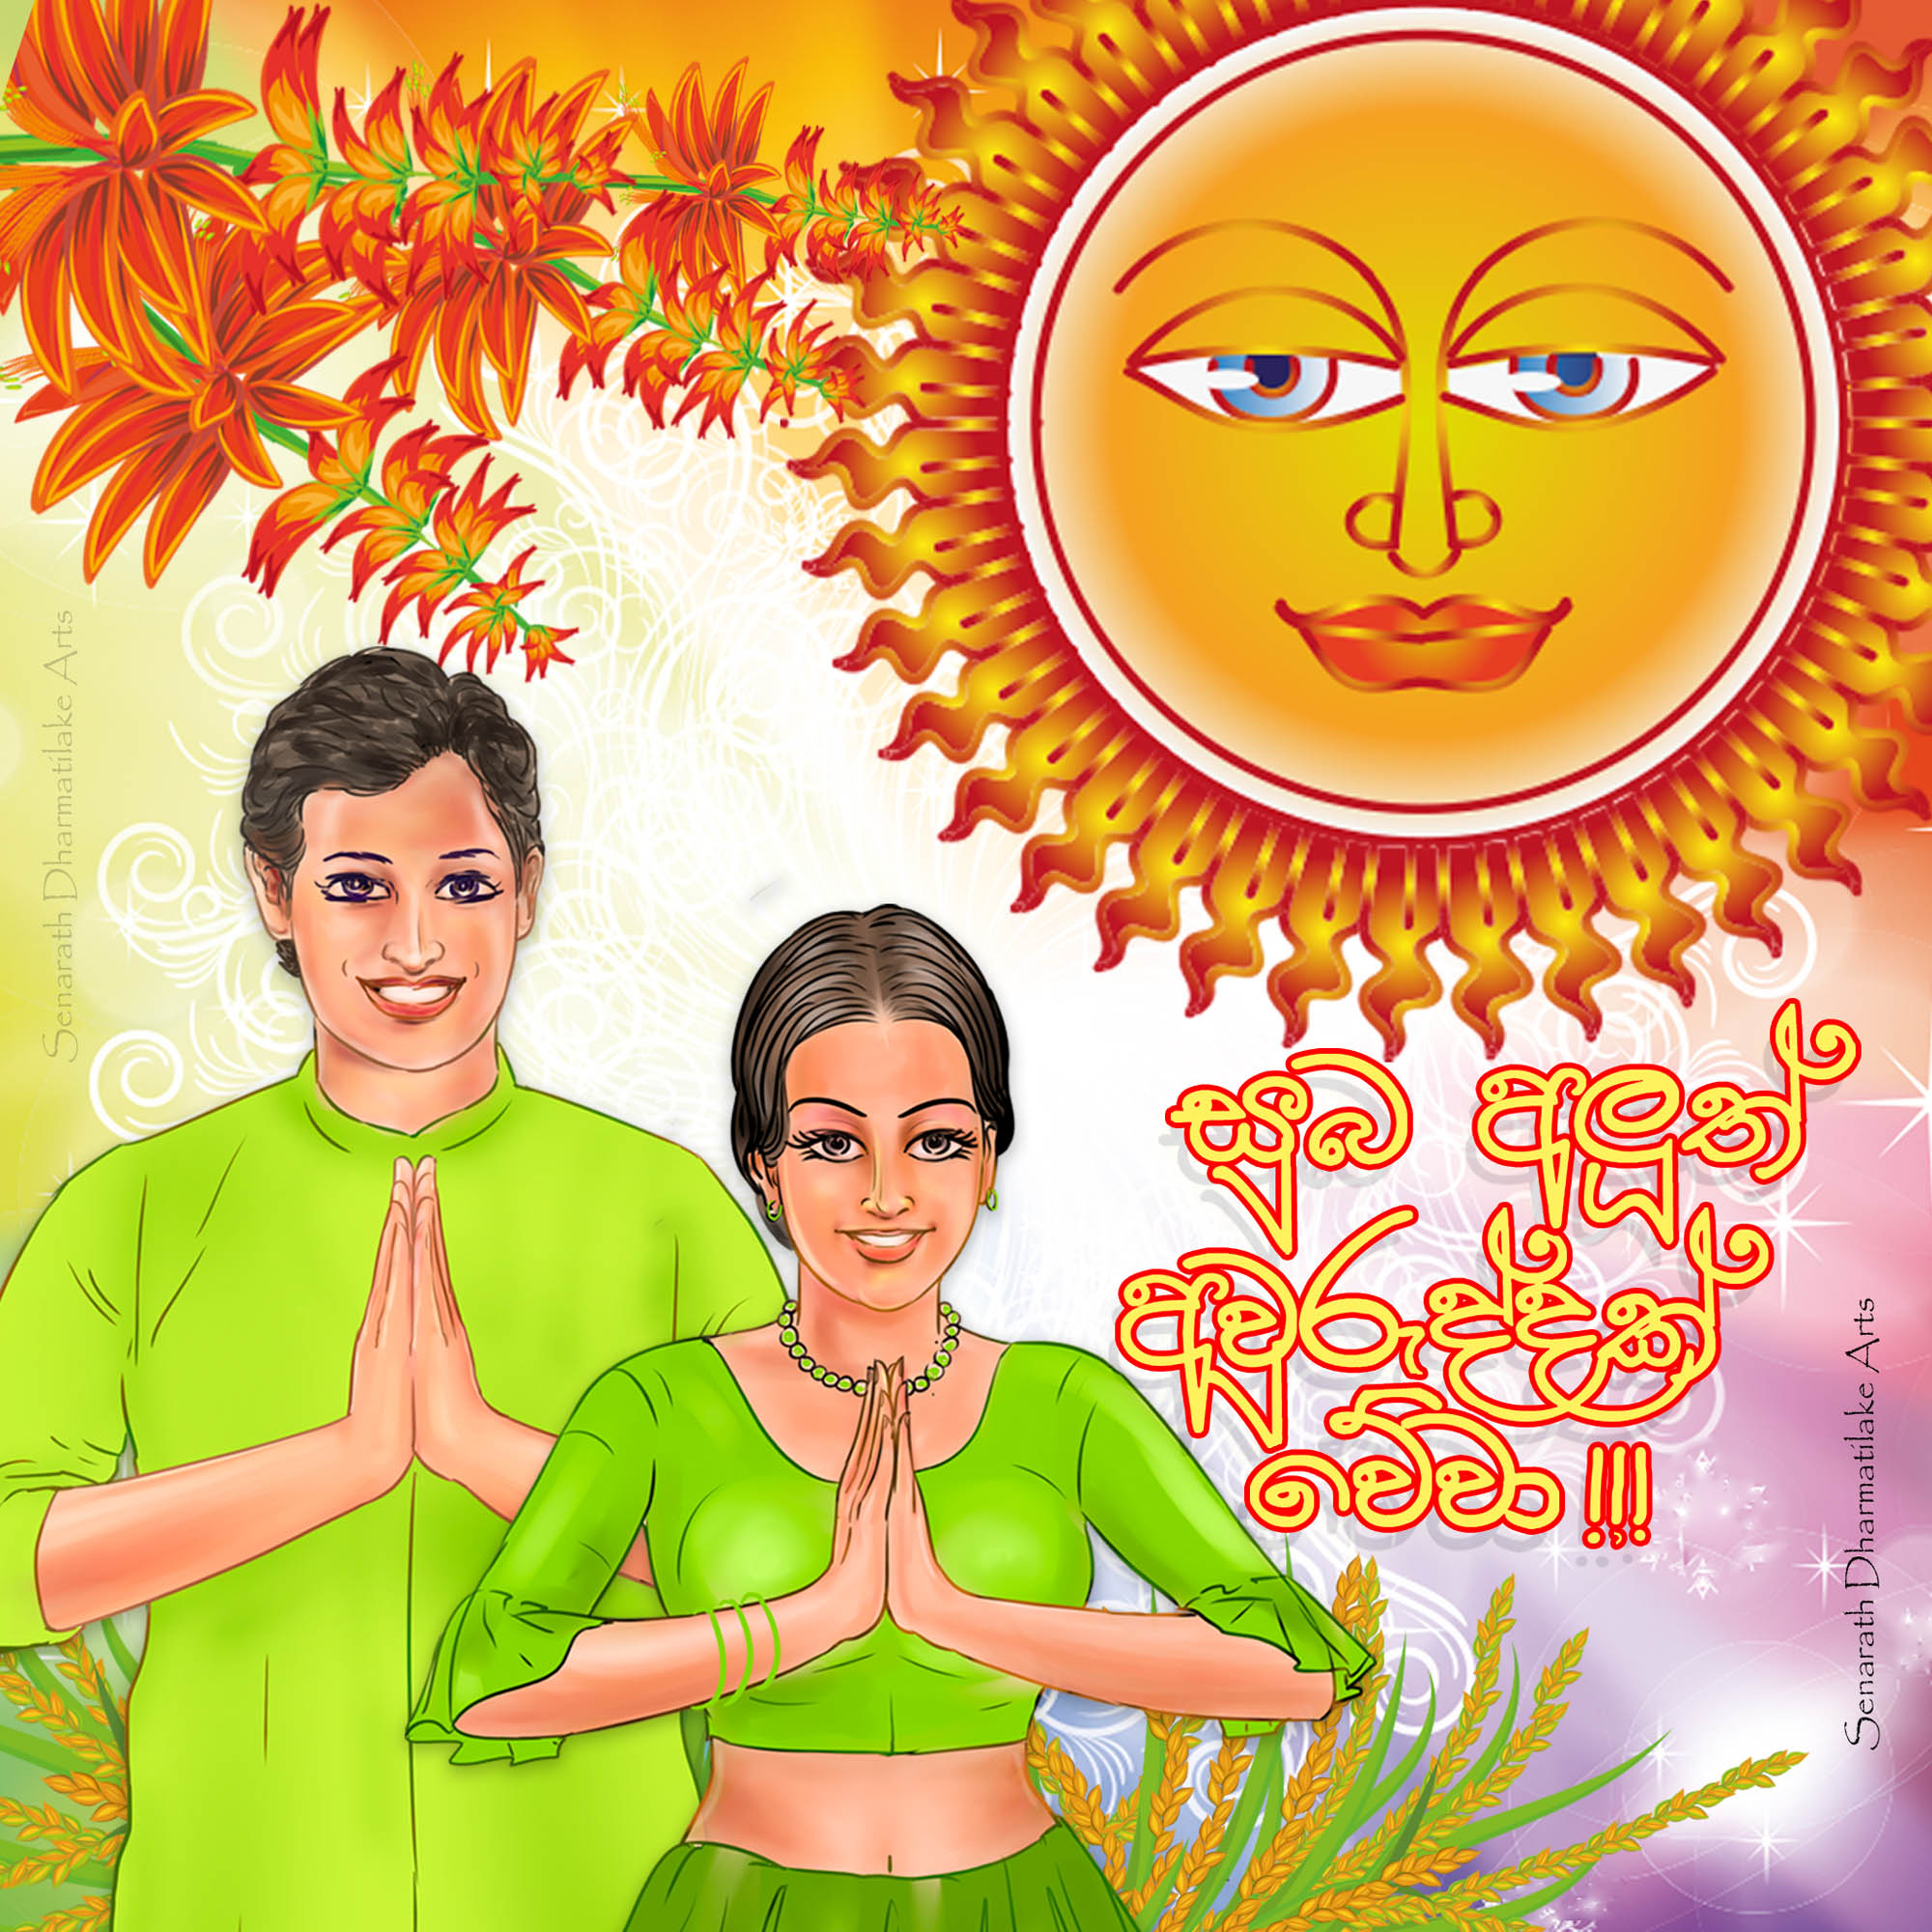 Wishing You A Happy Sinhala And Tamil New Year